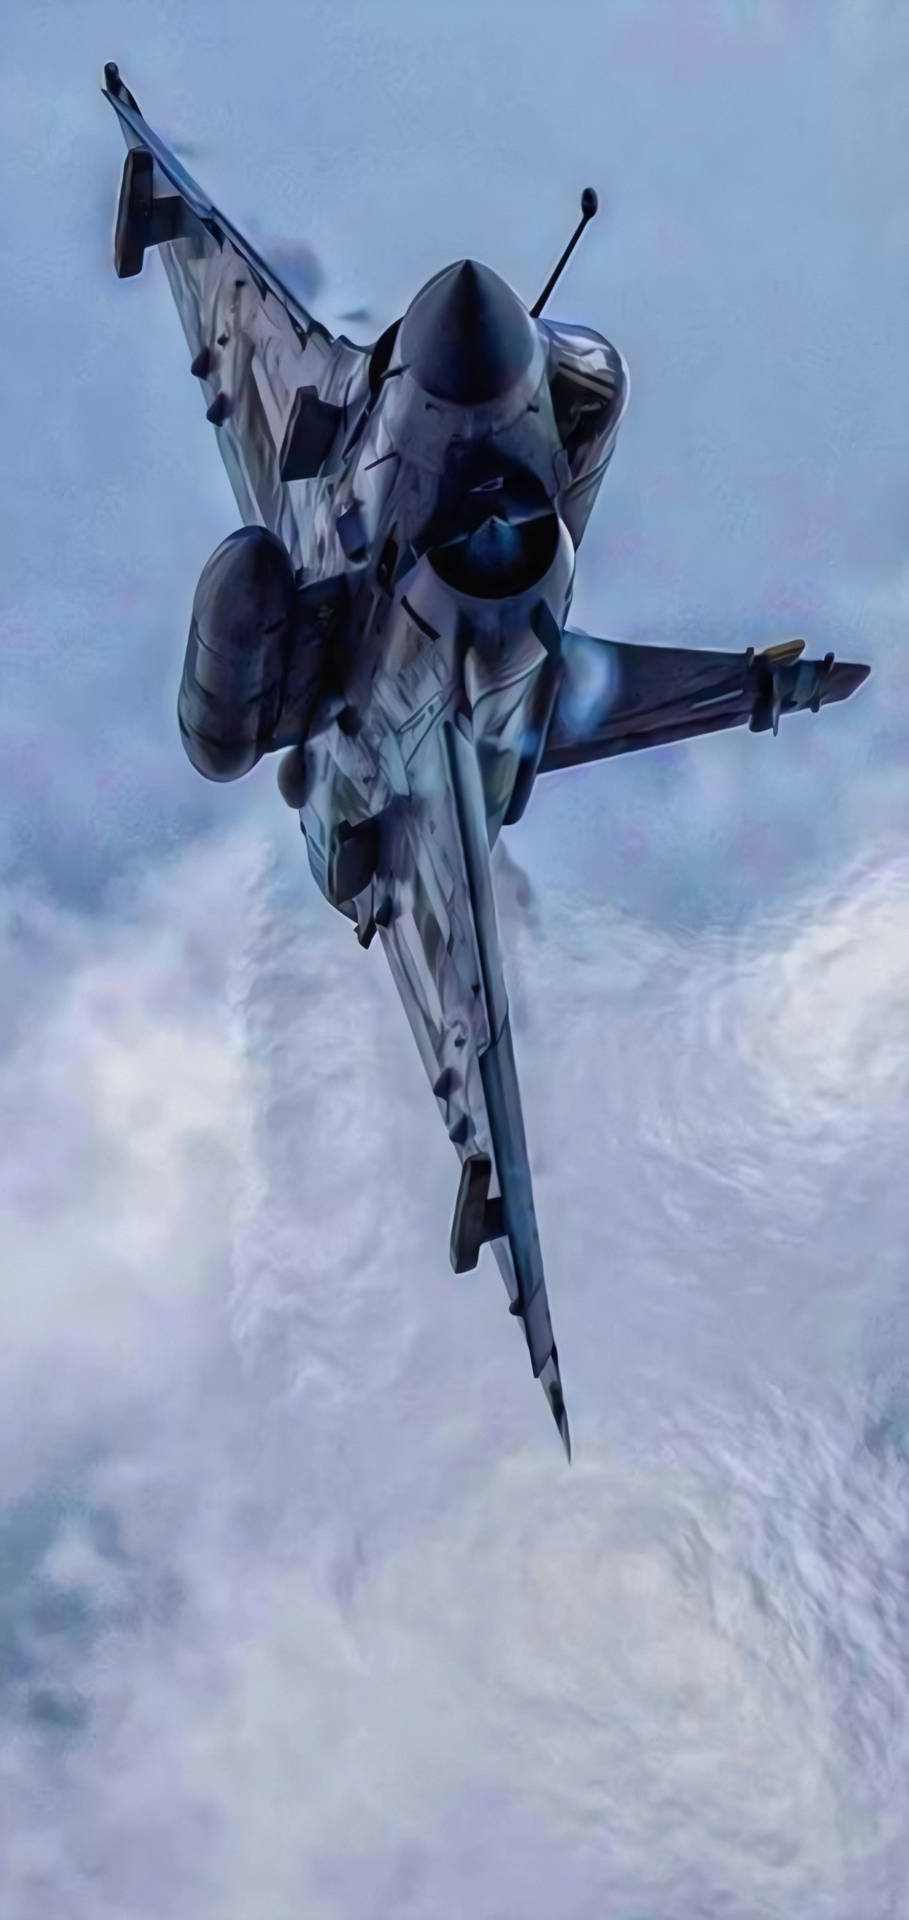 Swooping Fighter Plane Background